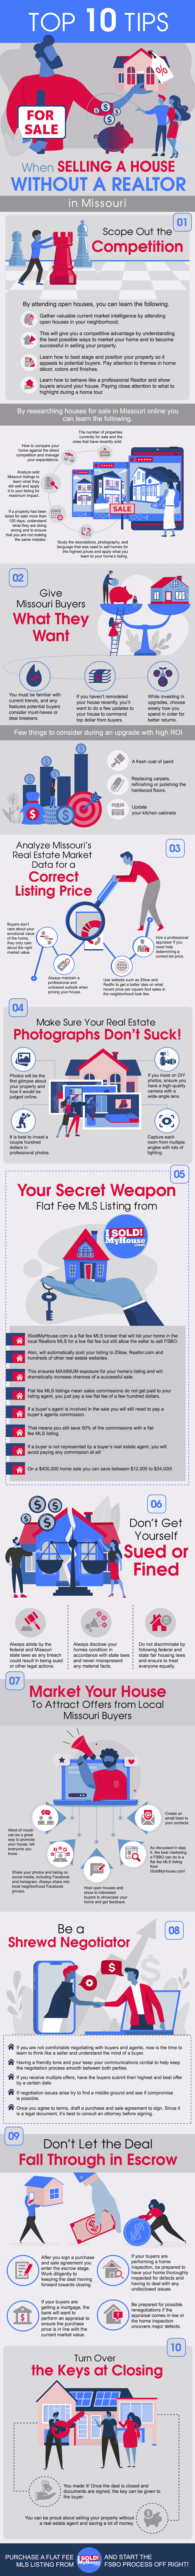 infographic of the 10 steps to sell a house in missouri without an agent